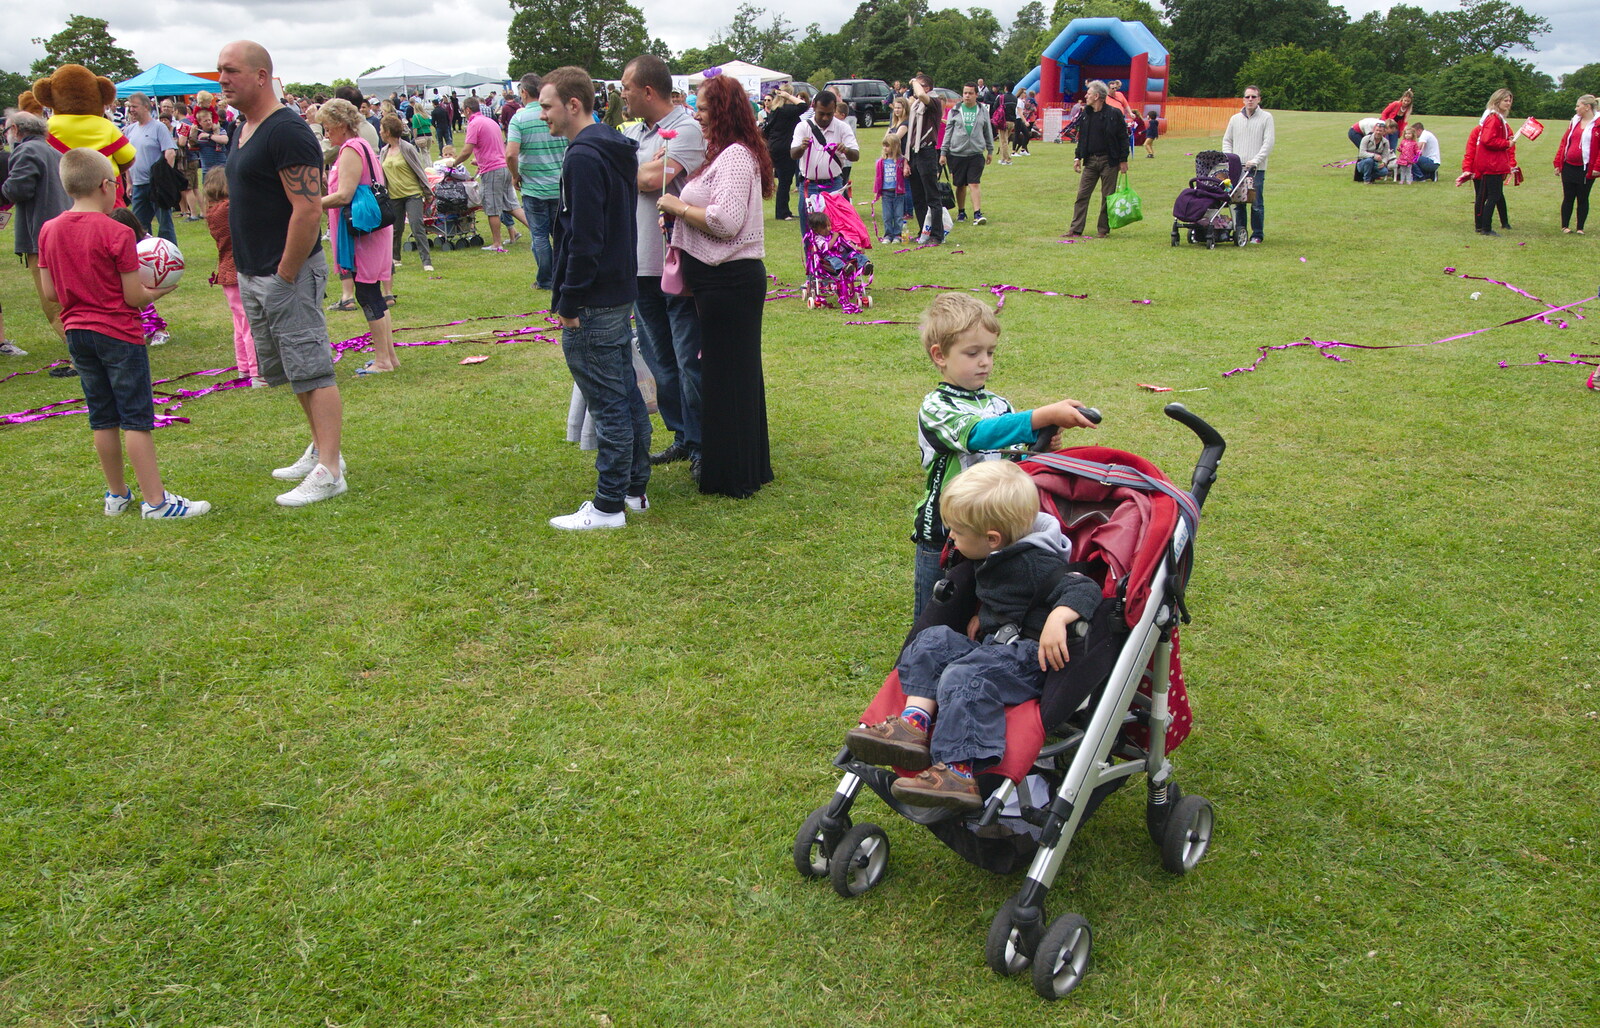 Harry and Fred from Isobel's Race For Life, Chantry Park, Ipswich - 11th June 2014